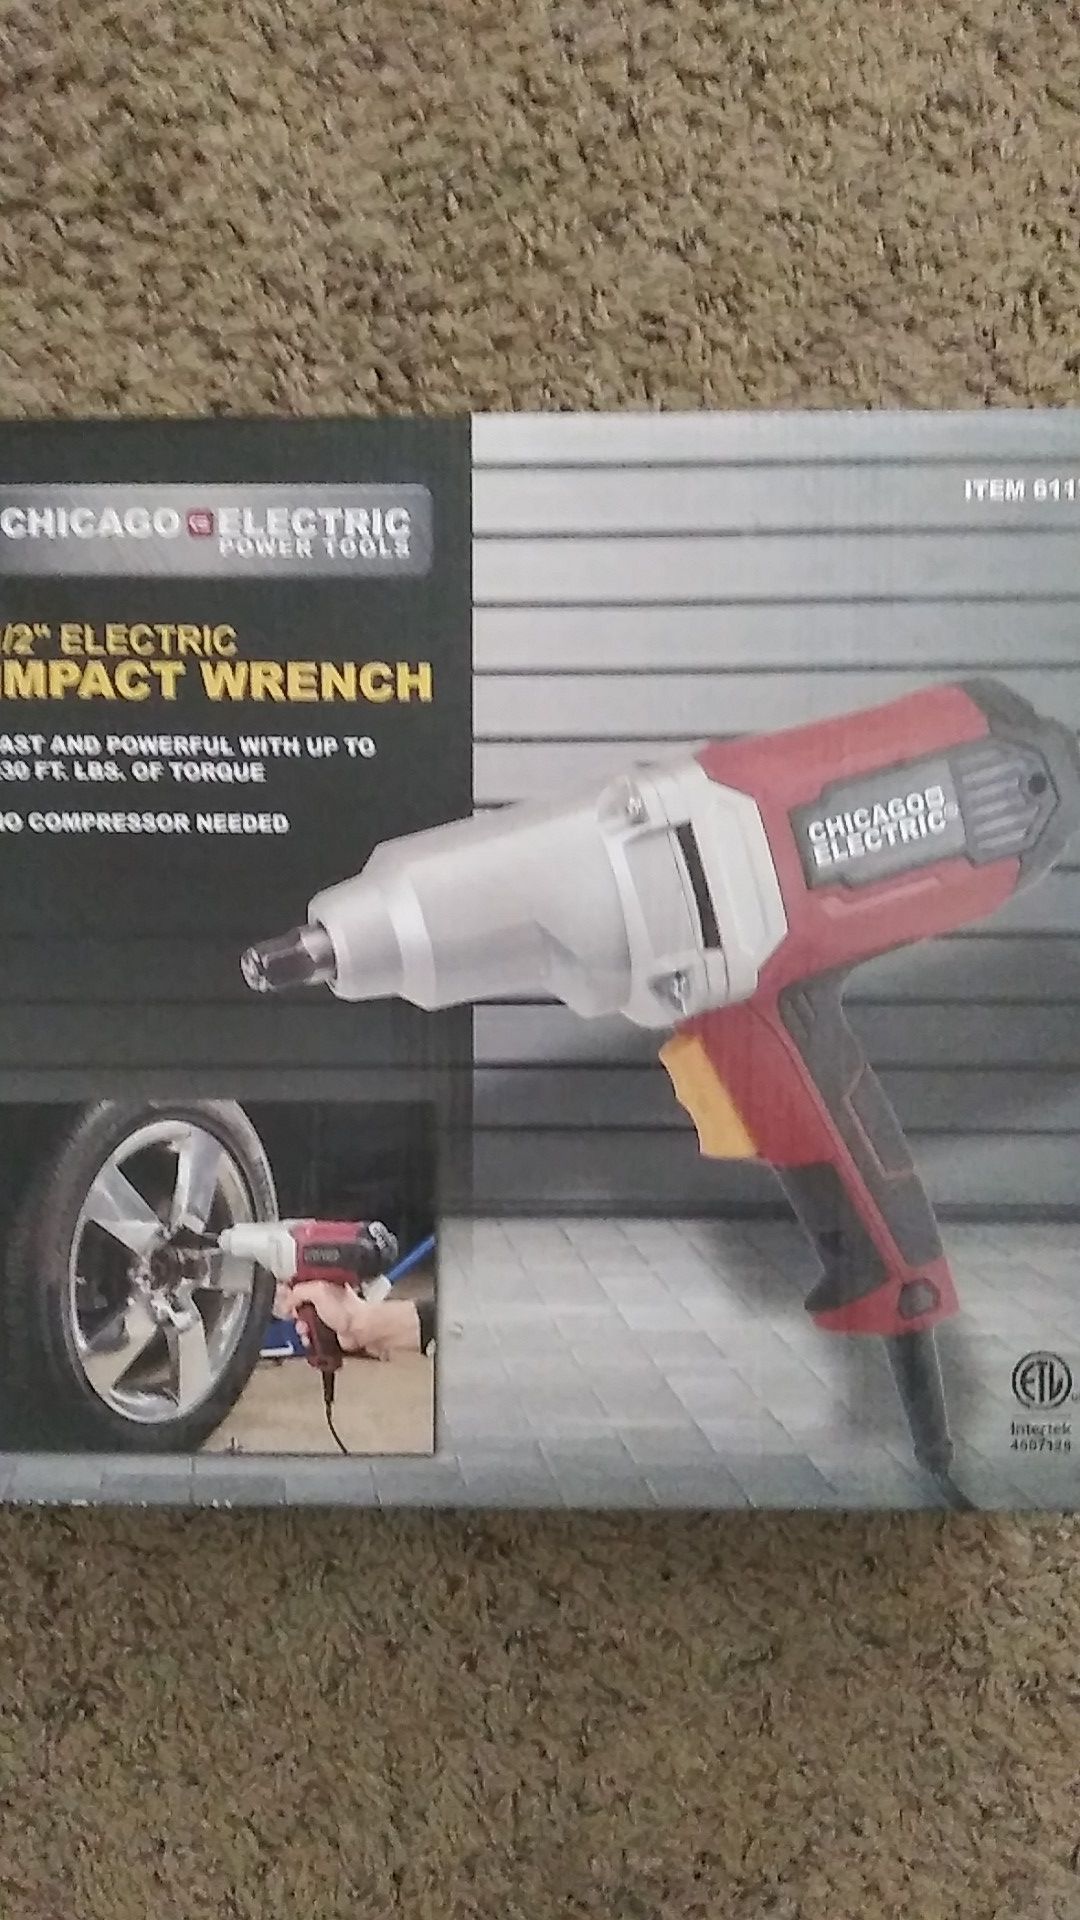 Chicago Electric corded impact wrench